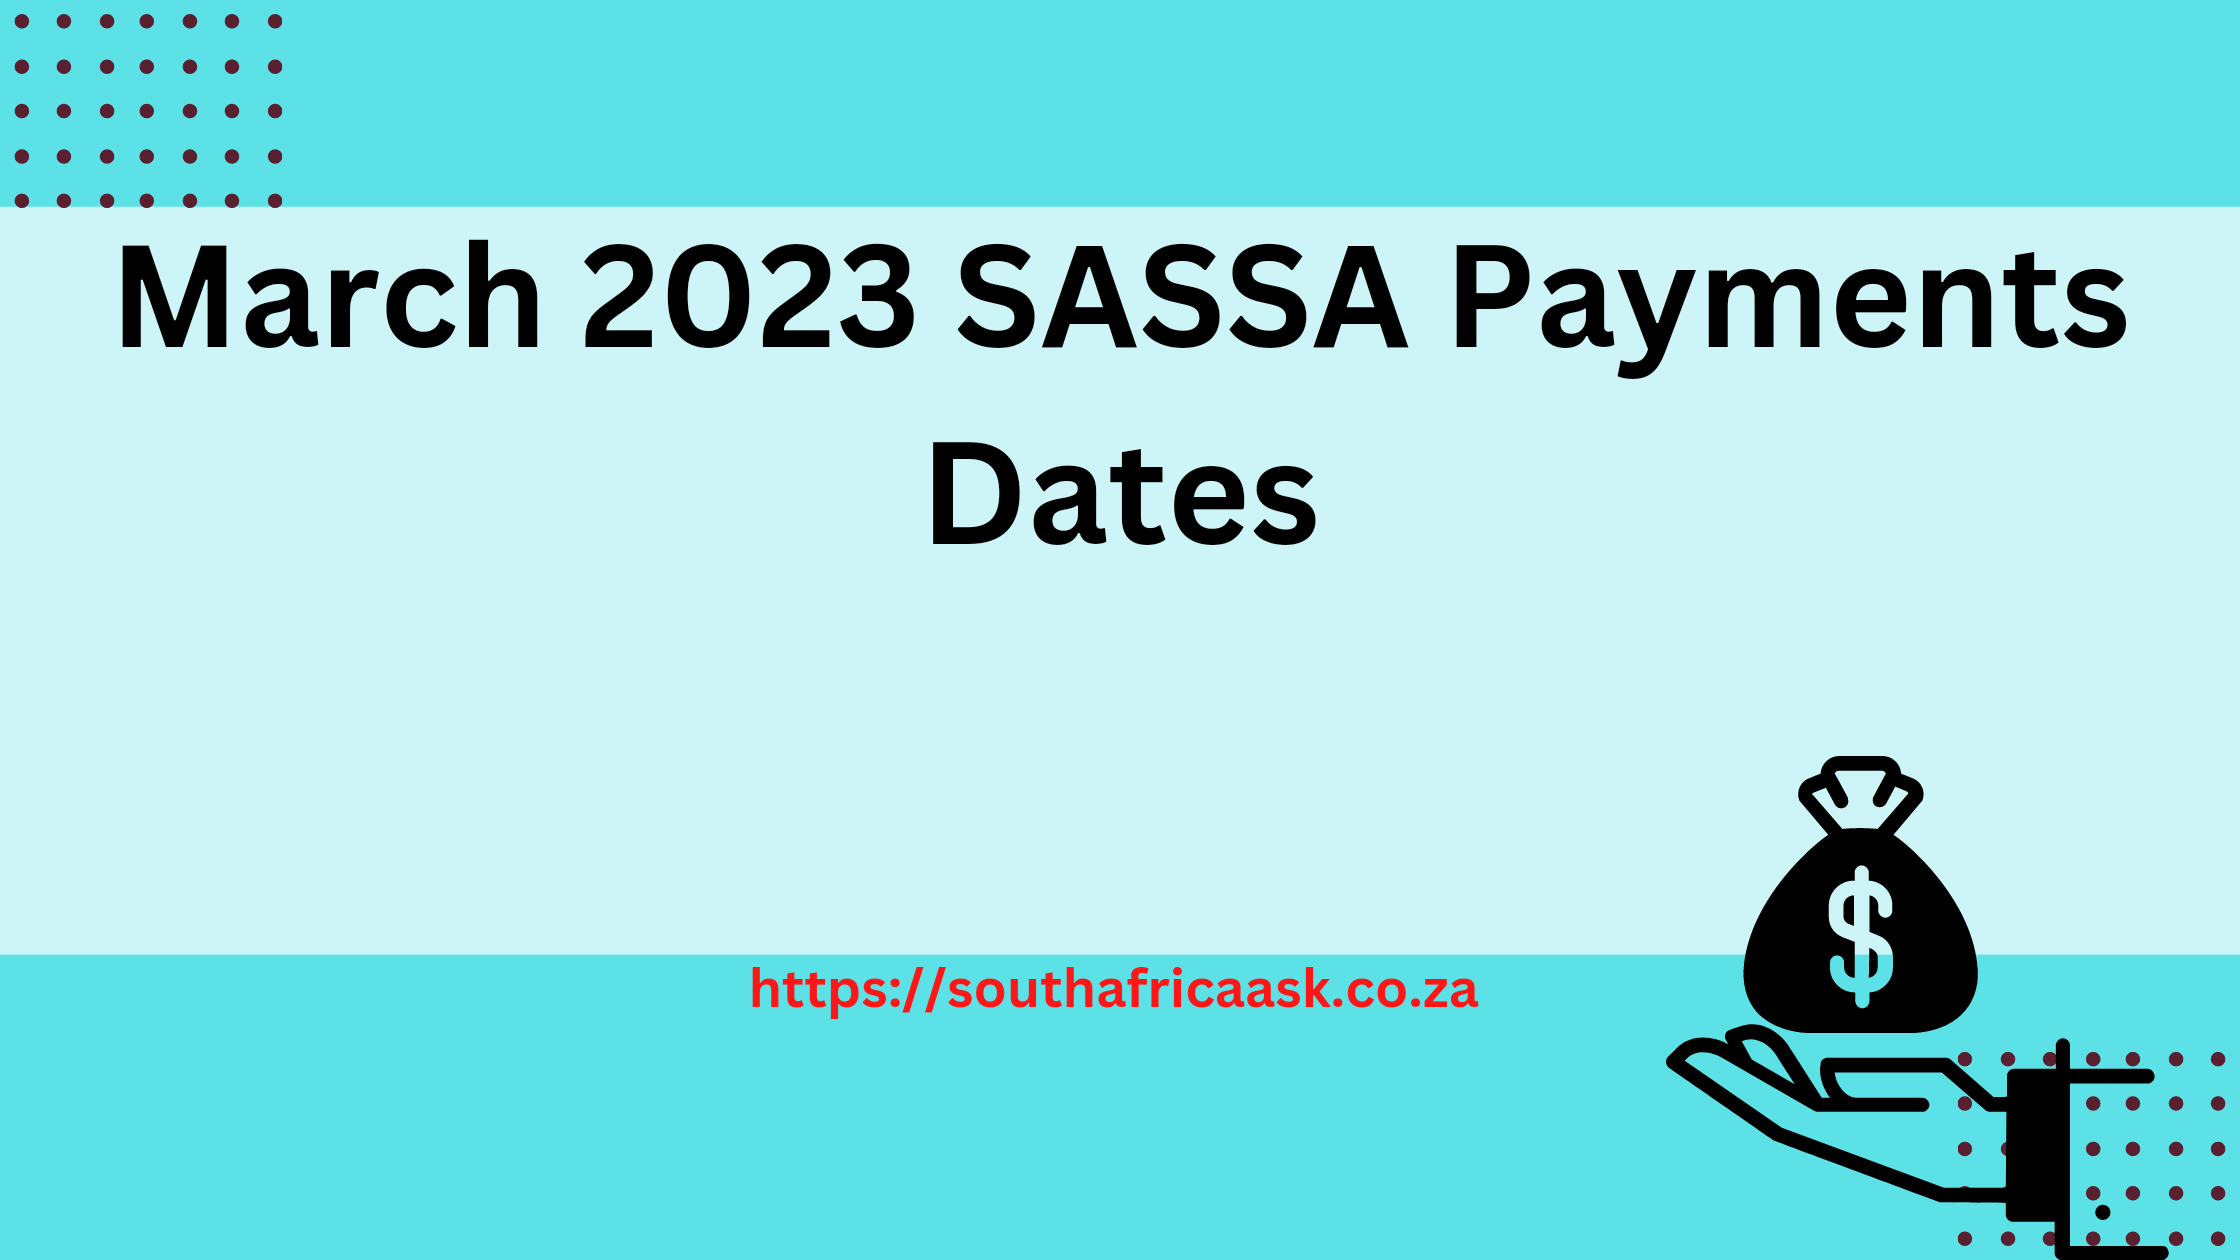 March 2023 SASSA Payments Dates